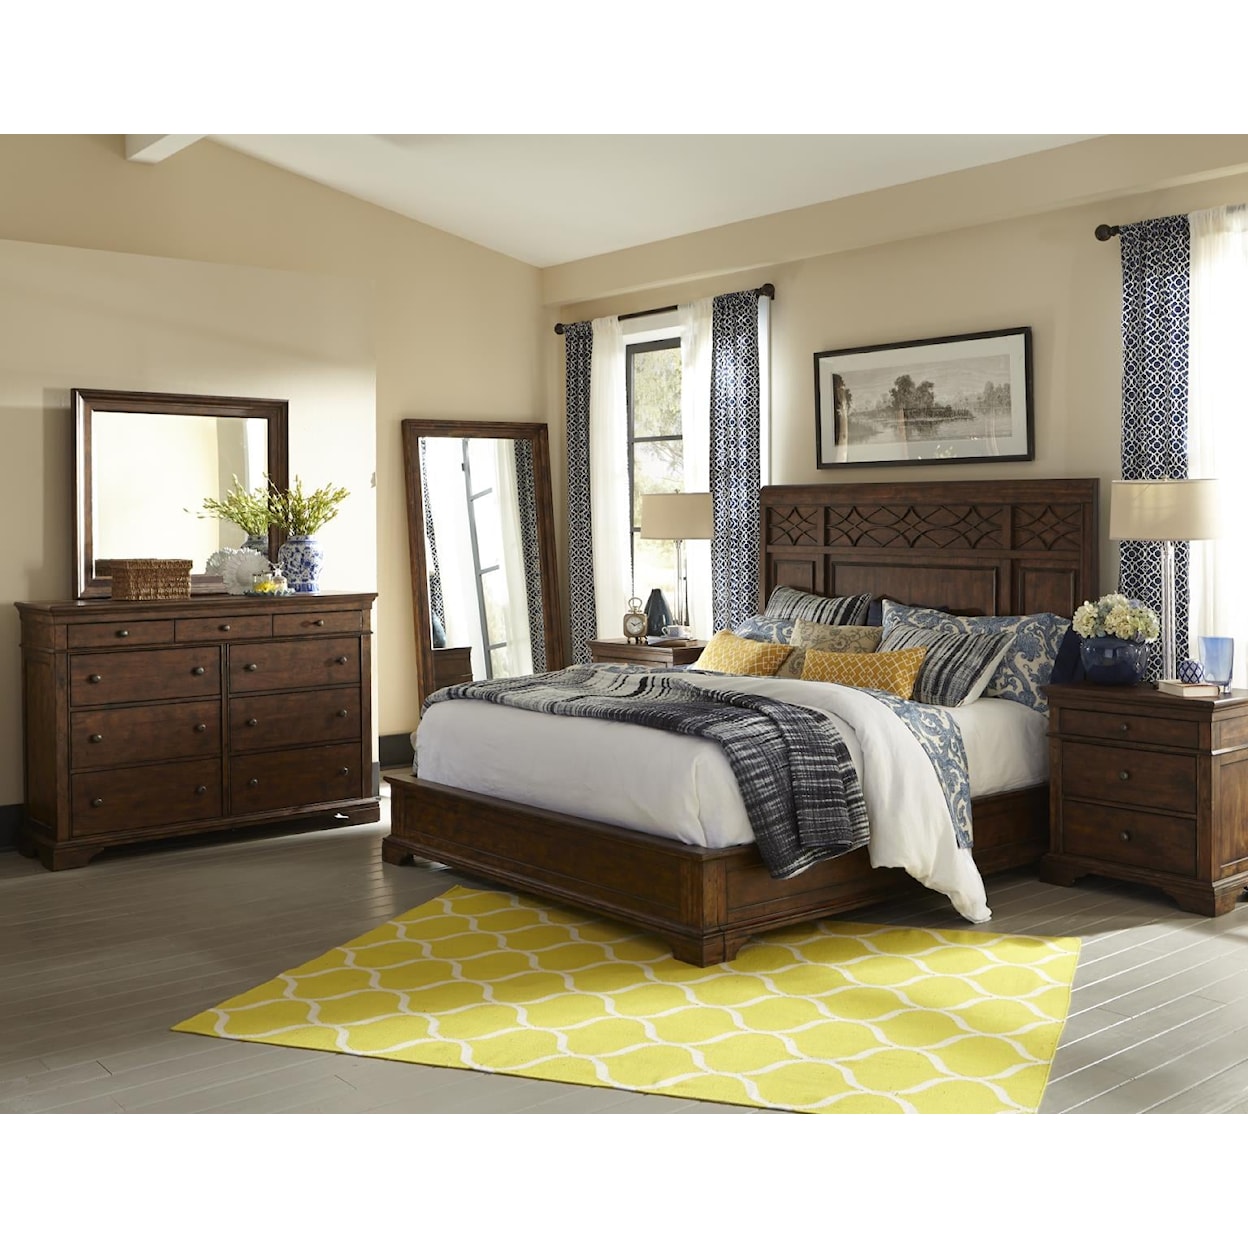 Trisha Yearwood Home Collection by Legacy Classic Trisha Yearwood Home Dresser